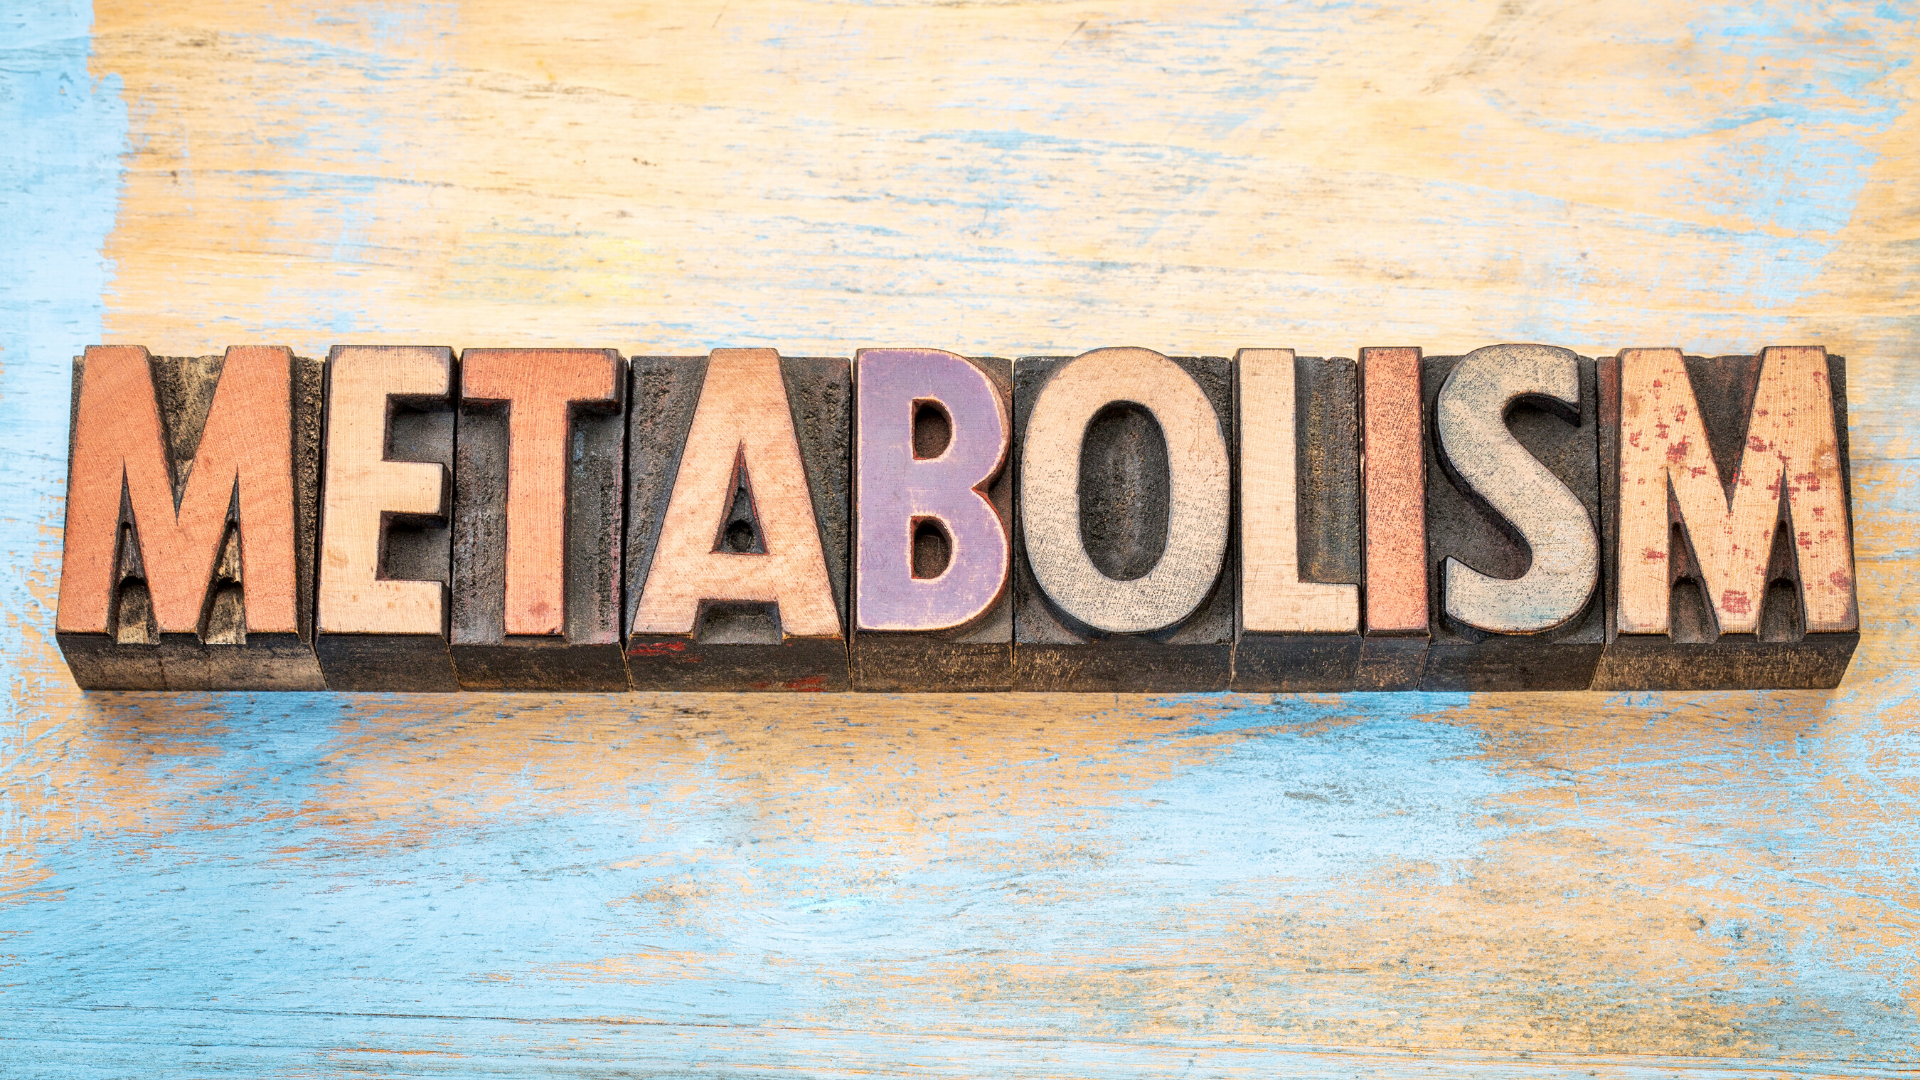 You may find yourself asking what is metabolism anyway and how can it help me finally lose the weight for good? When you’re trying your best to get into better shape